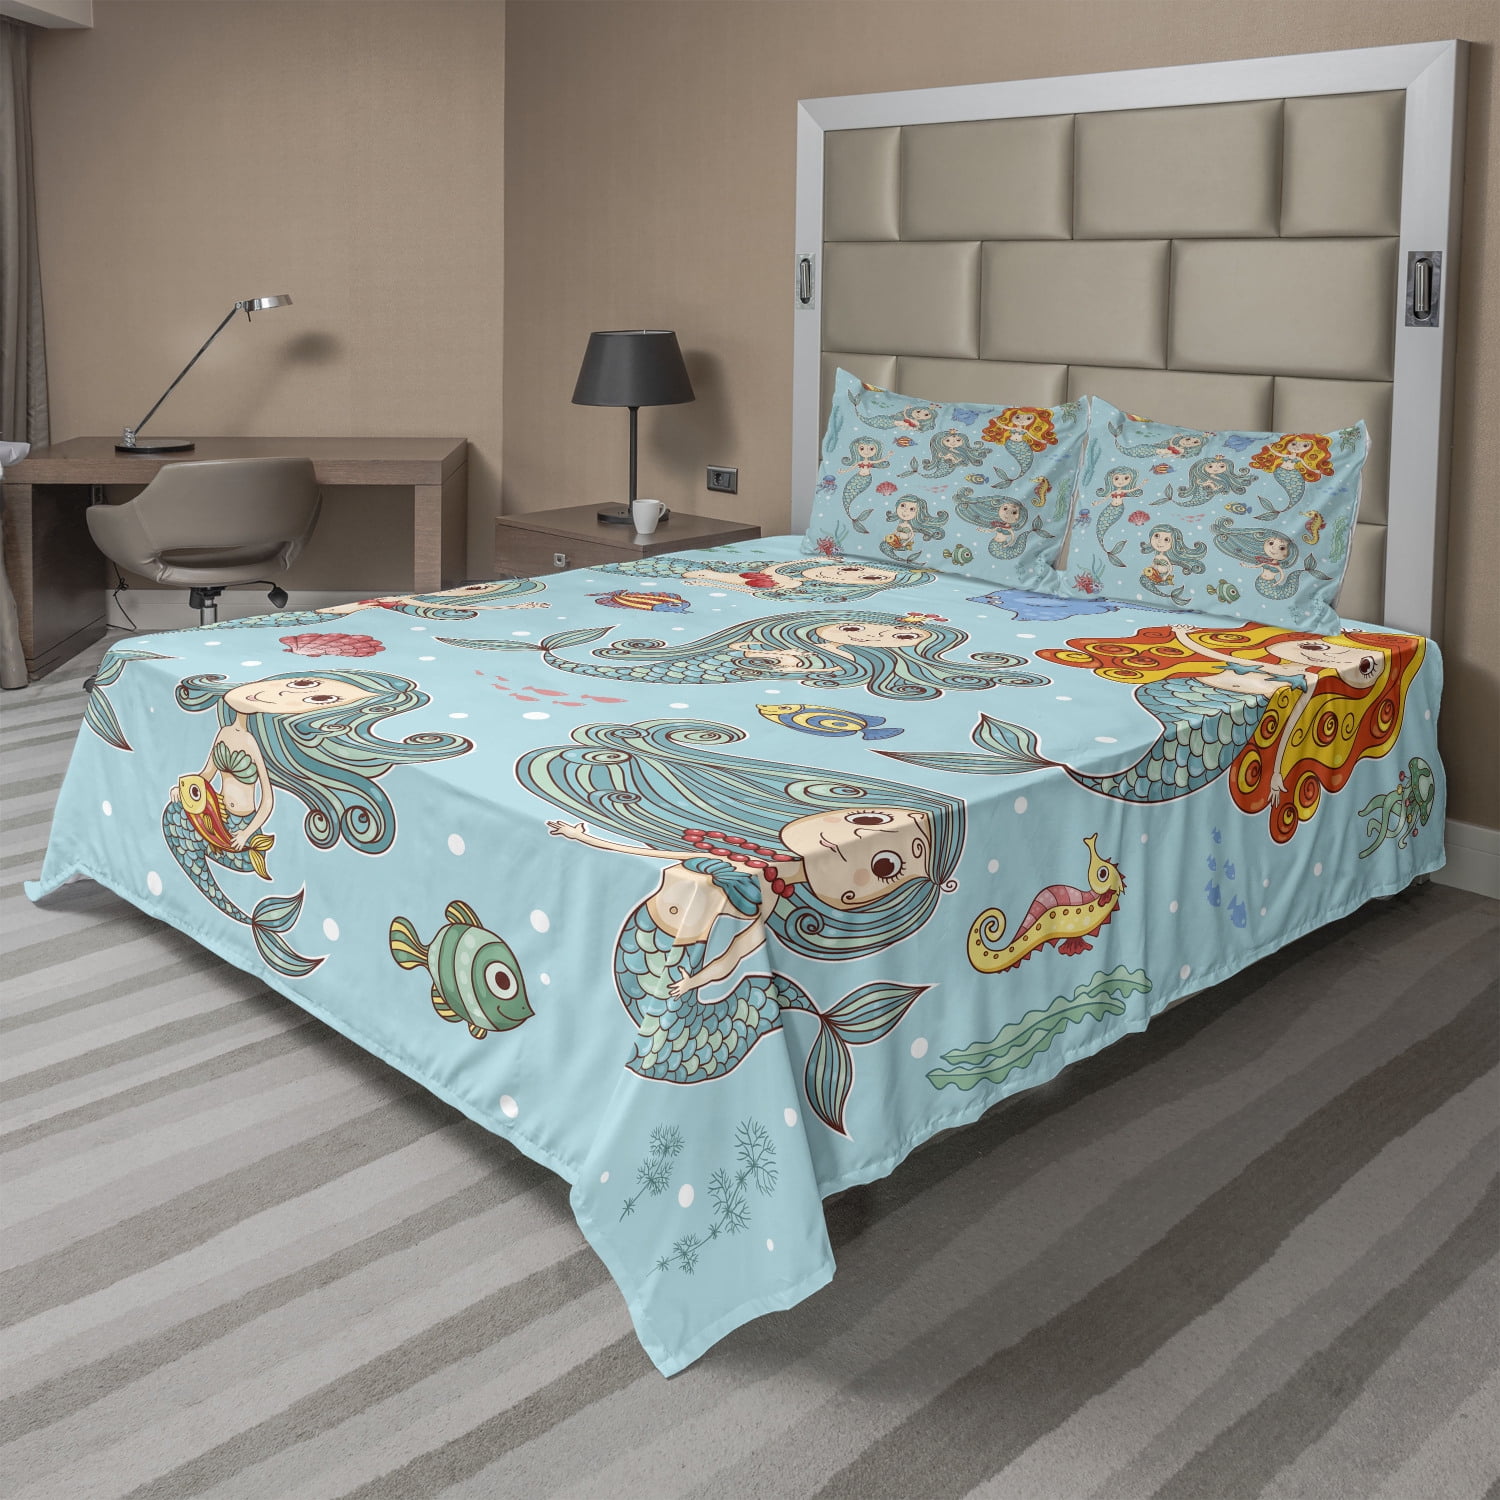 Mermaid Sheet Set, Composition Girls Different Types of Sea Creatures  Marine Themed Print, Fitted and Flat Sheet with Pillowcases Bedding Accent  4 